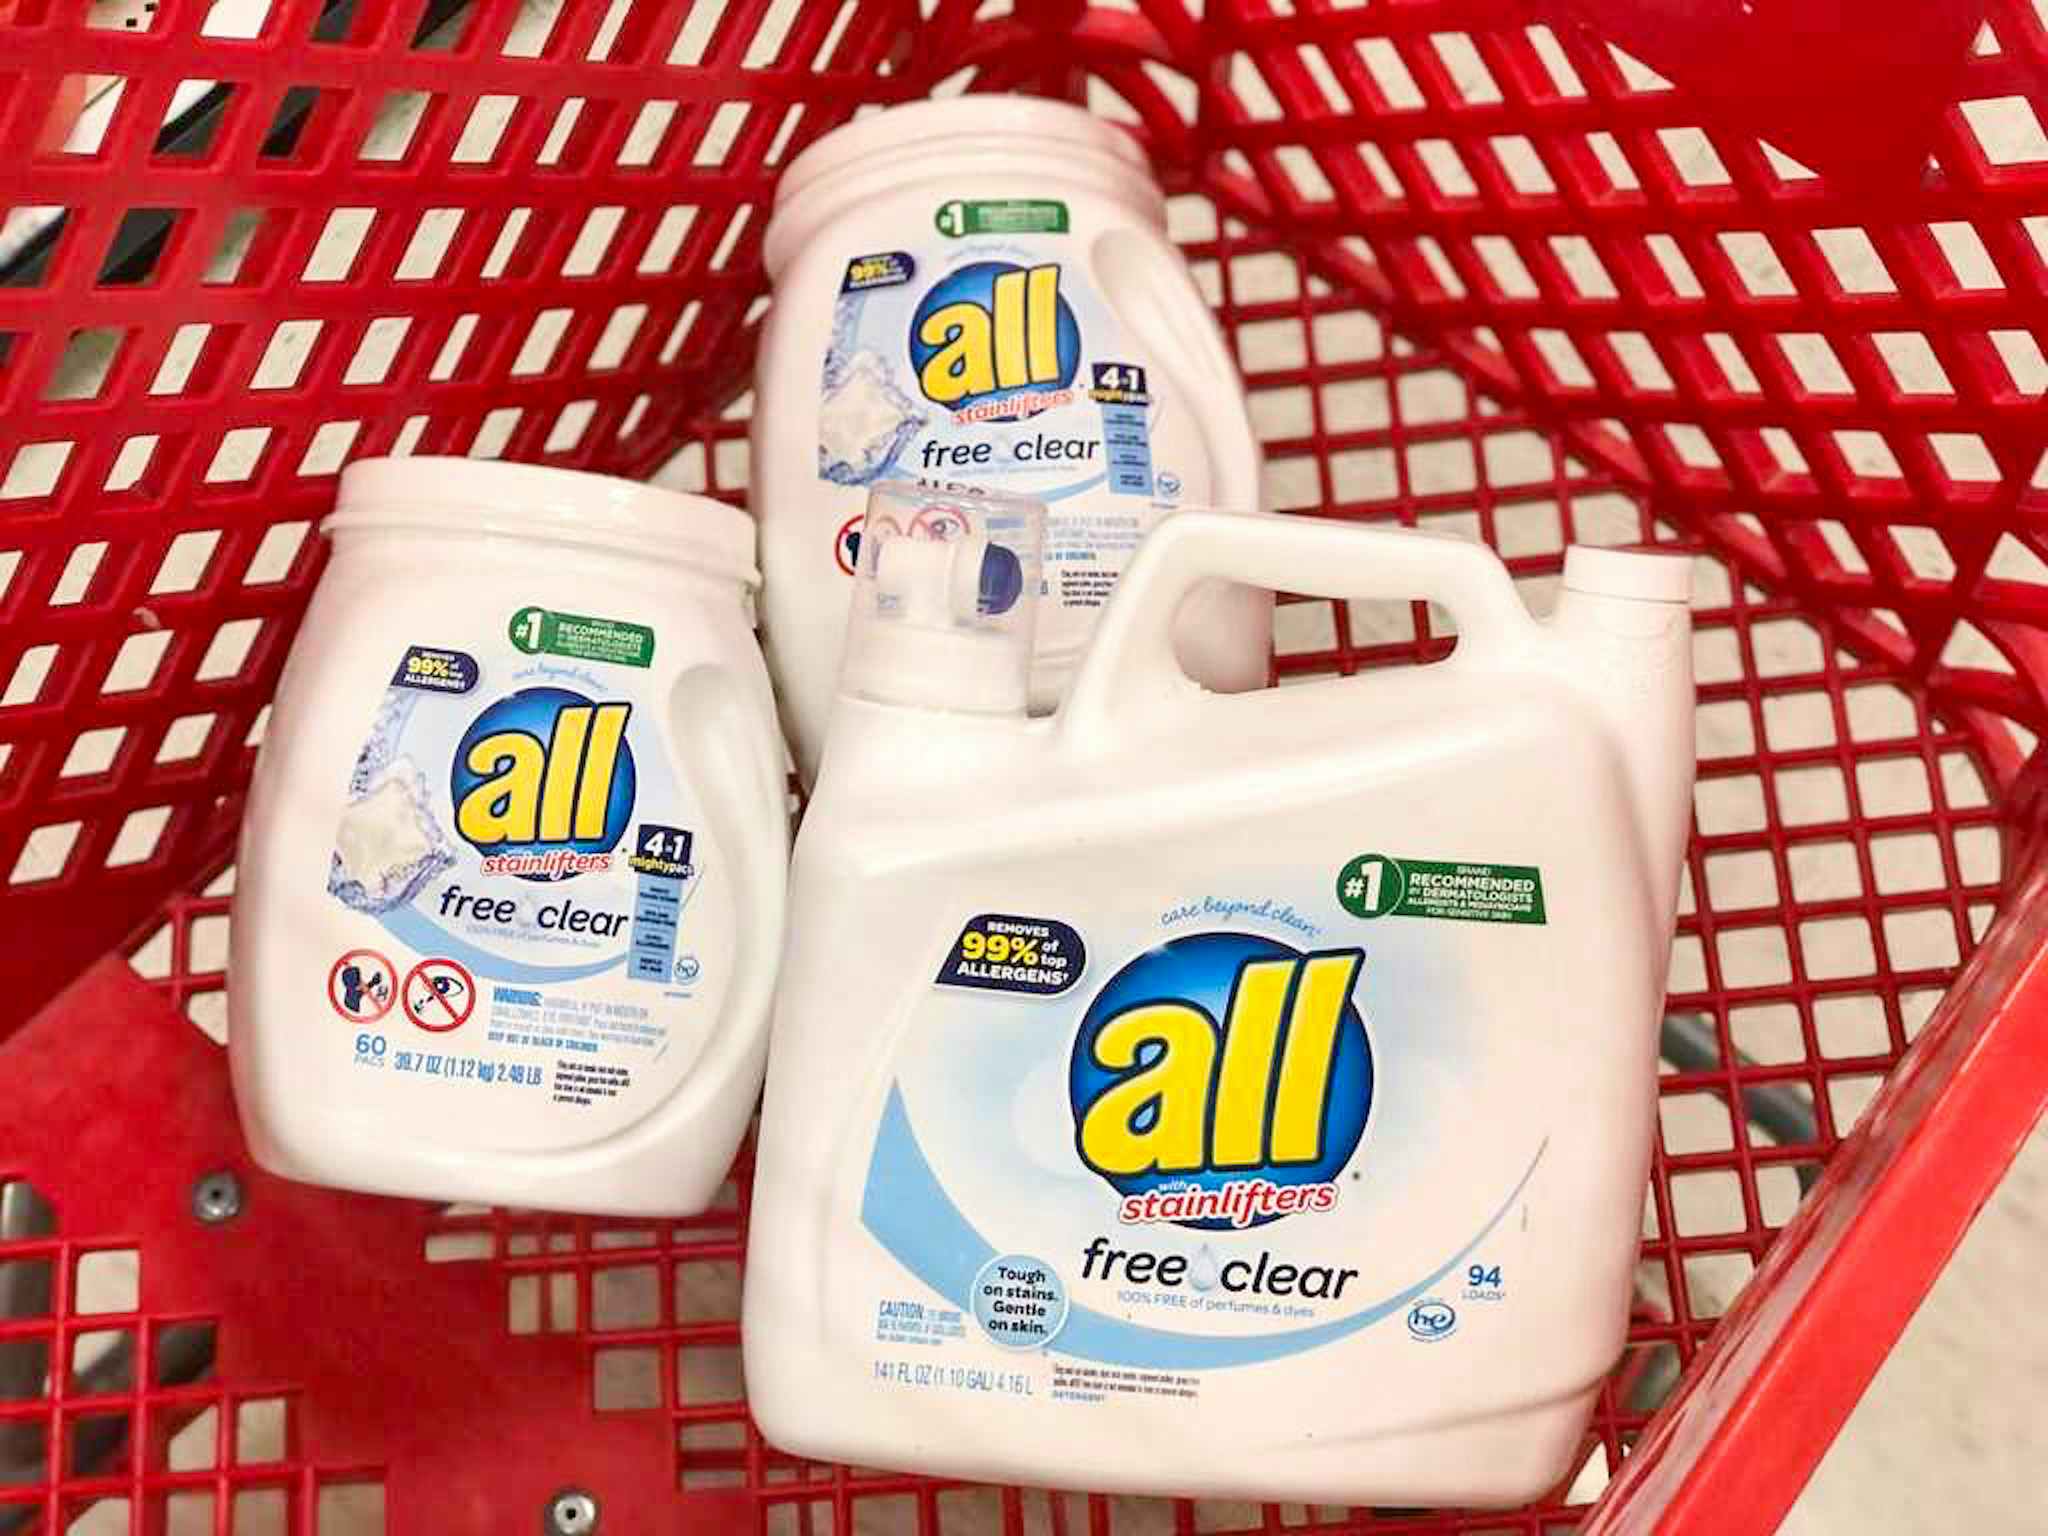 all laundry detergent in a target cart